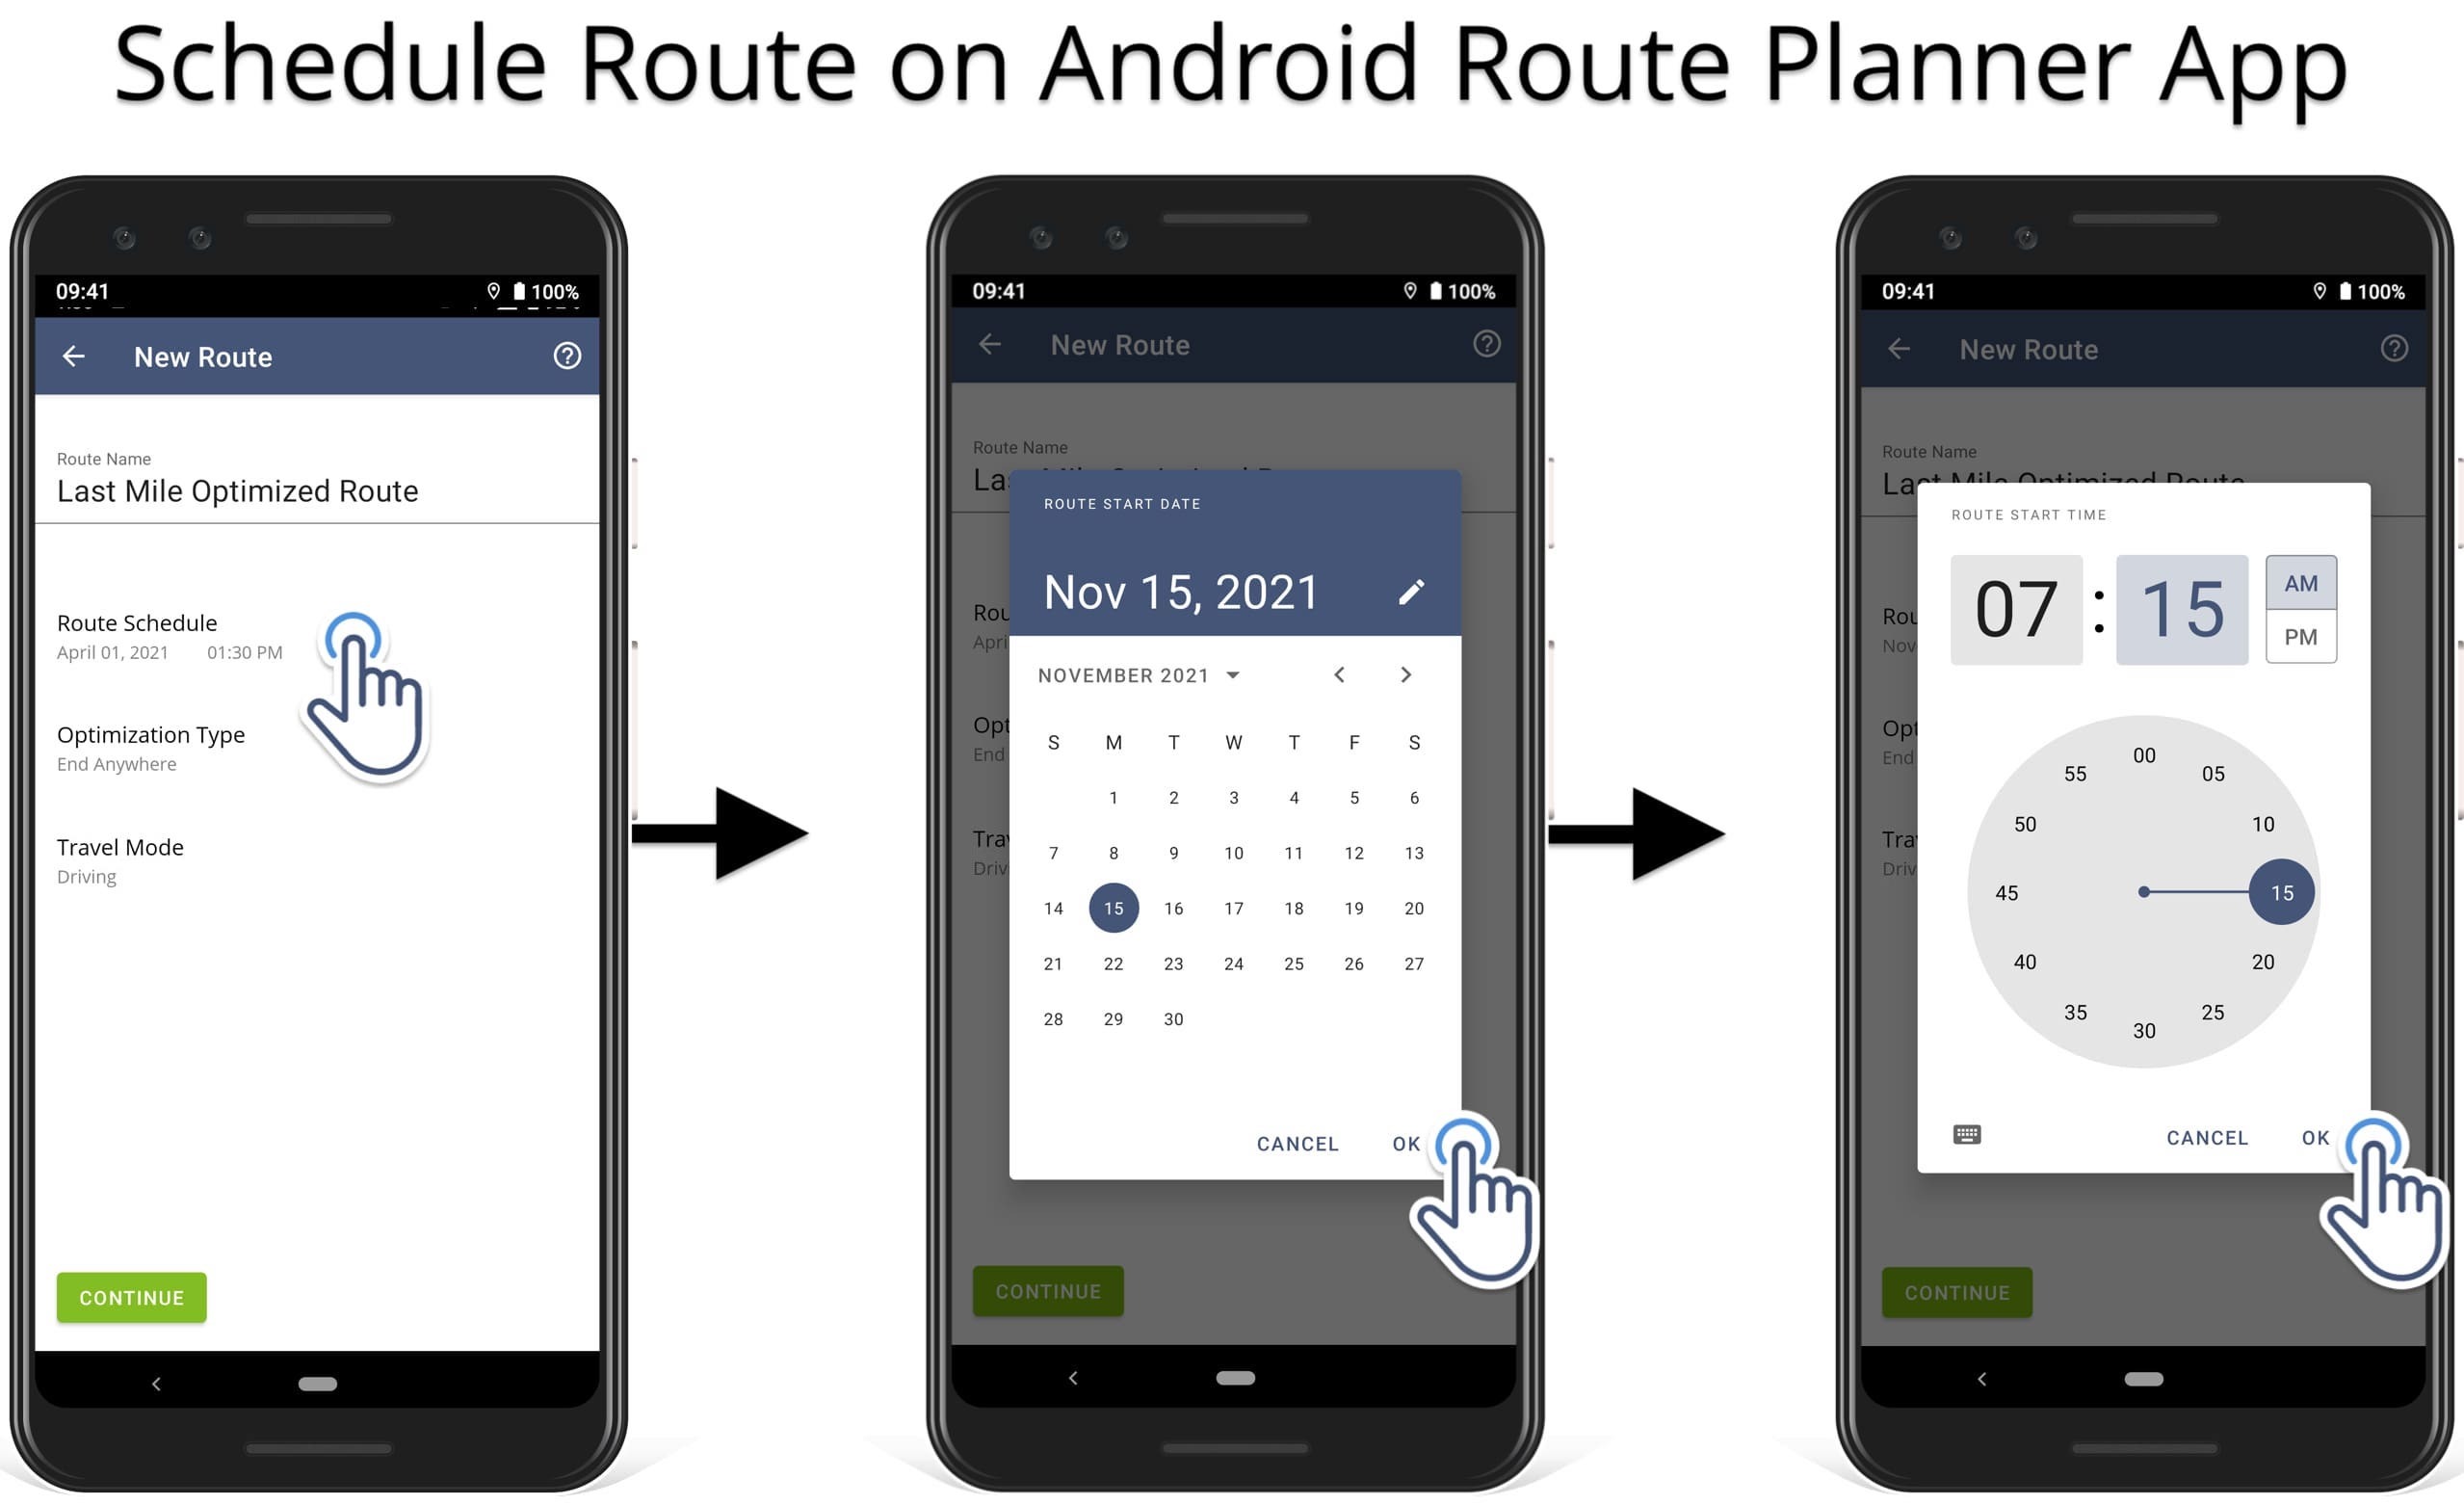 Scheduling and rescheduling routes on Route4Me's Route Planner app.